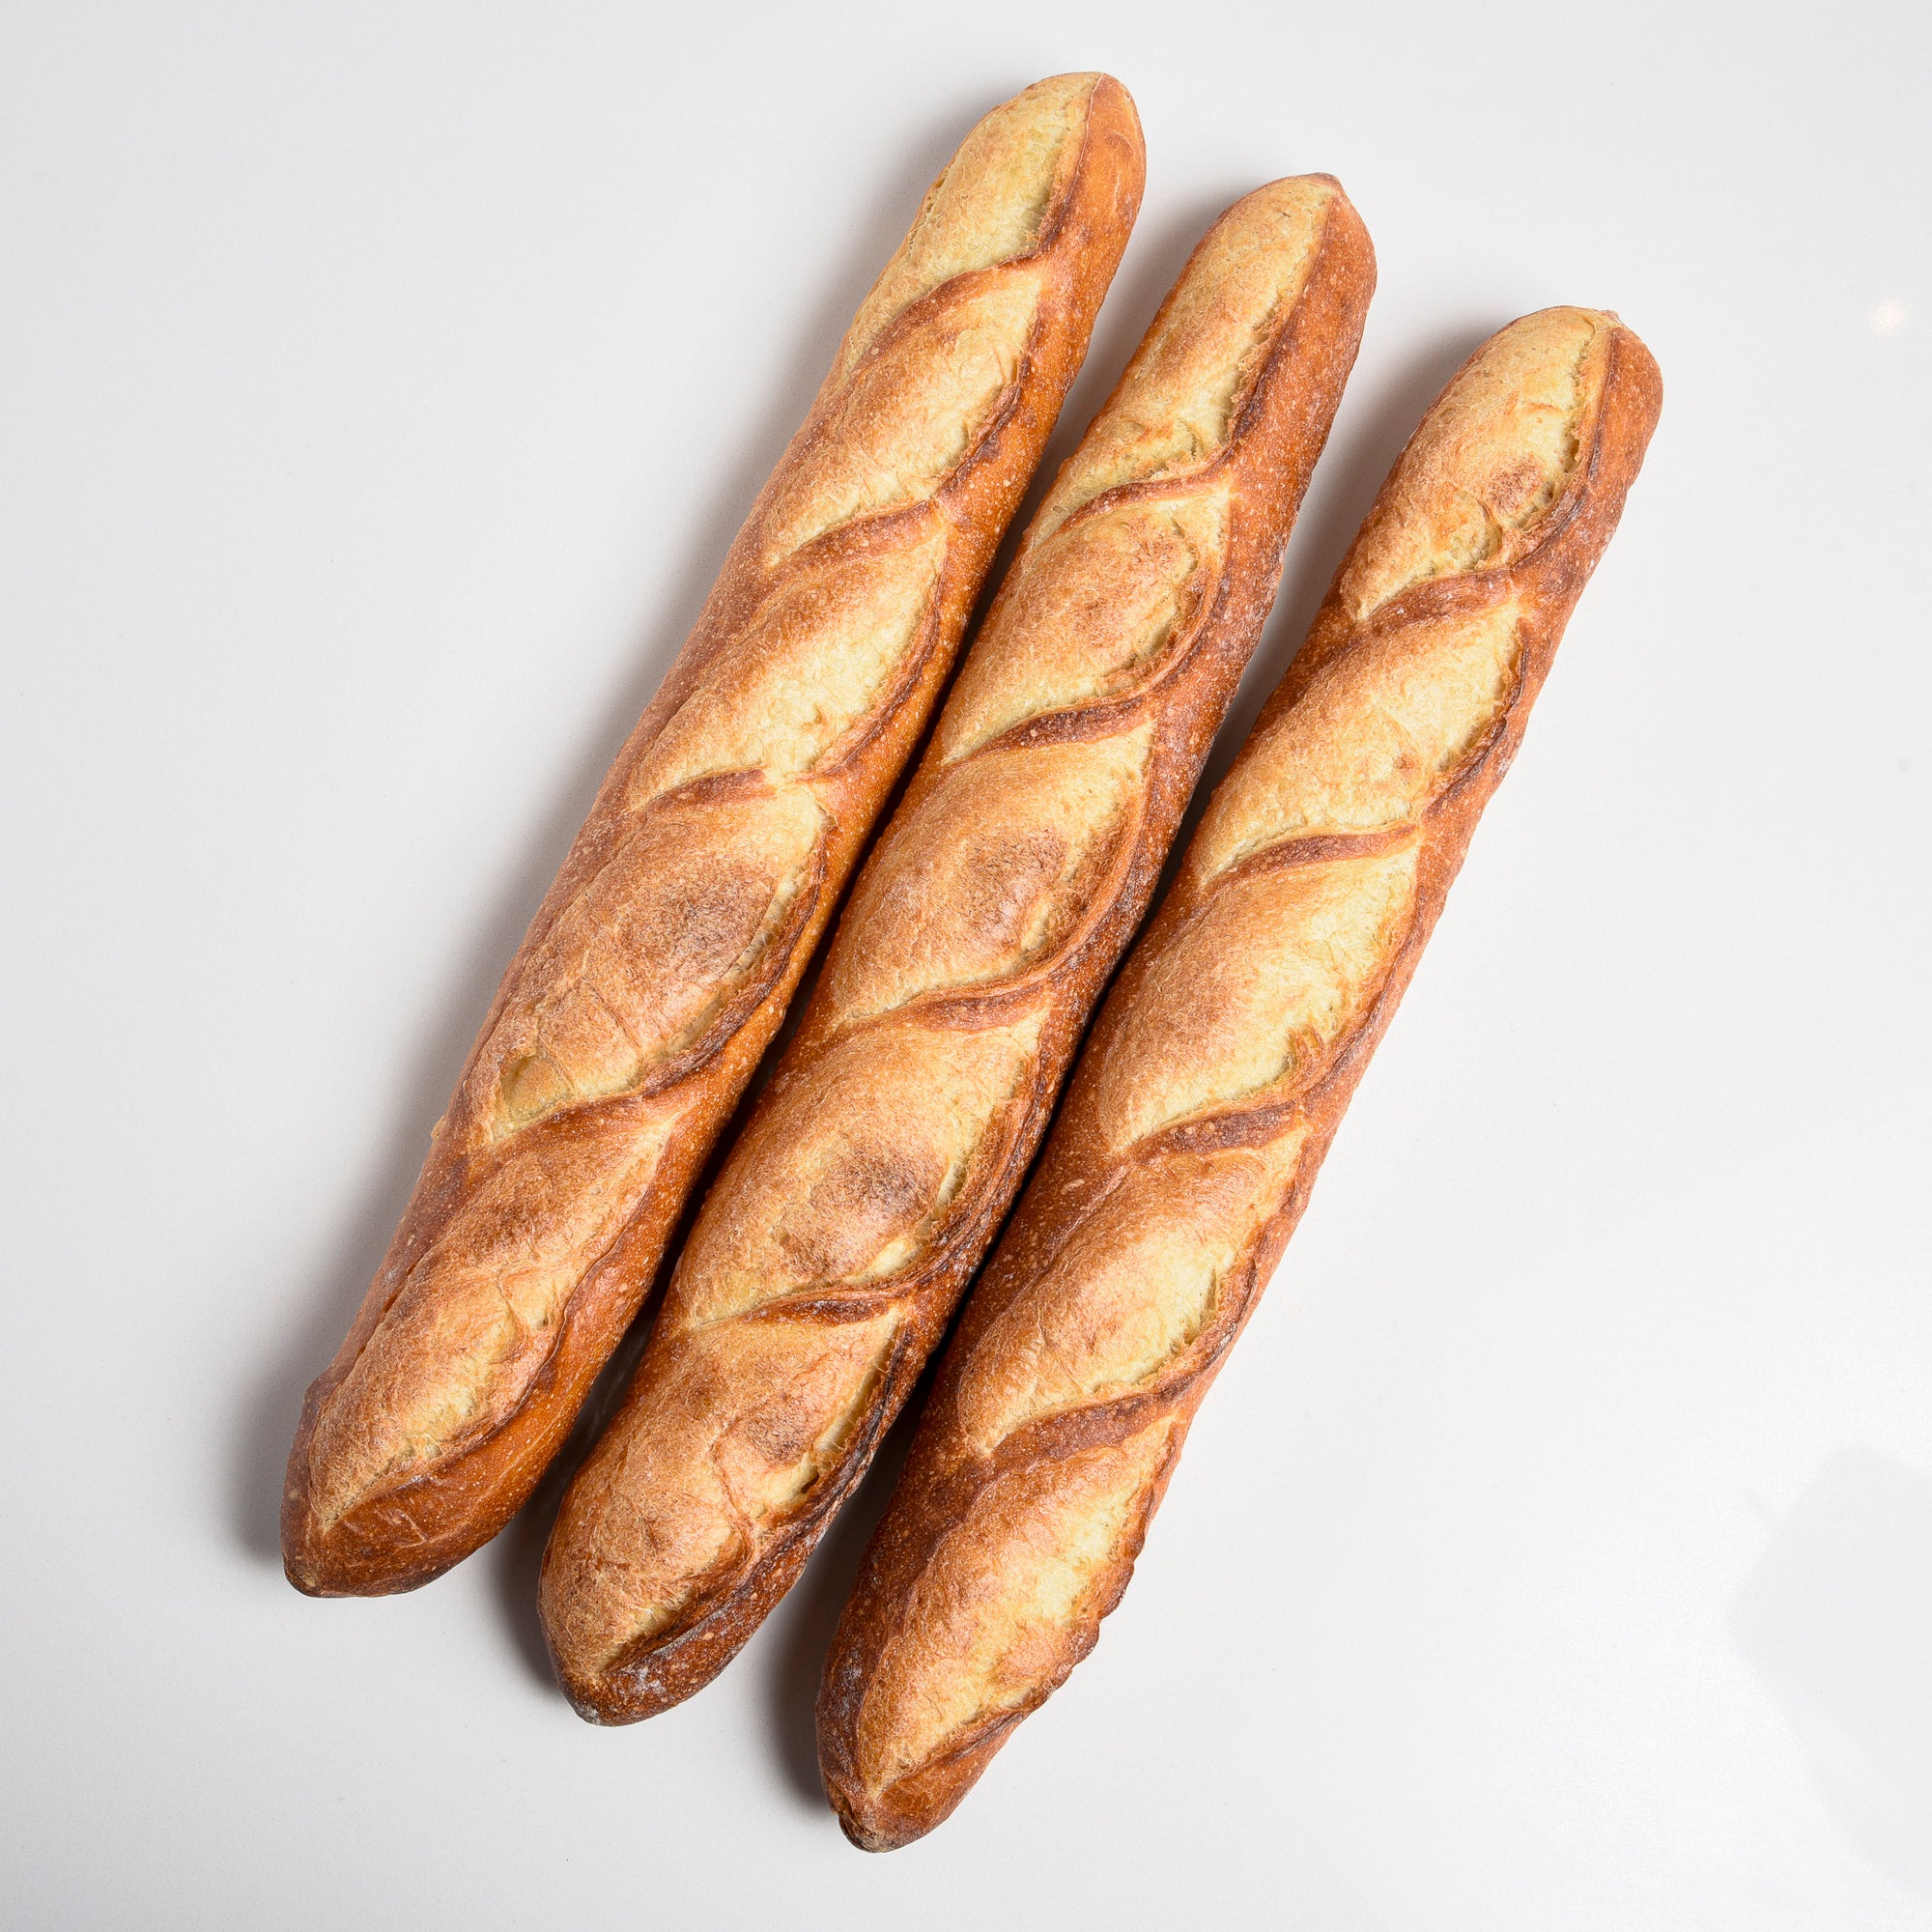 Group of Le fournil bakery traditional French baguettes